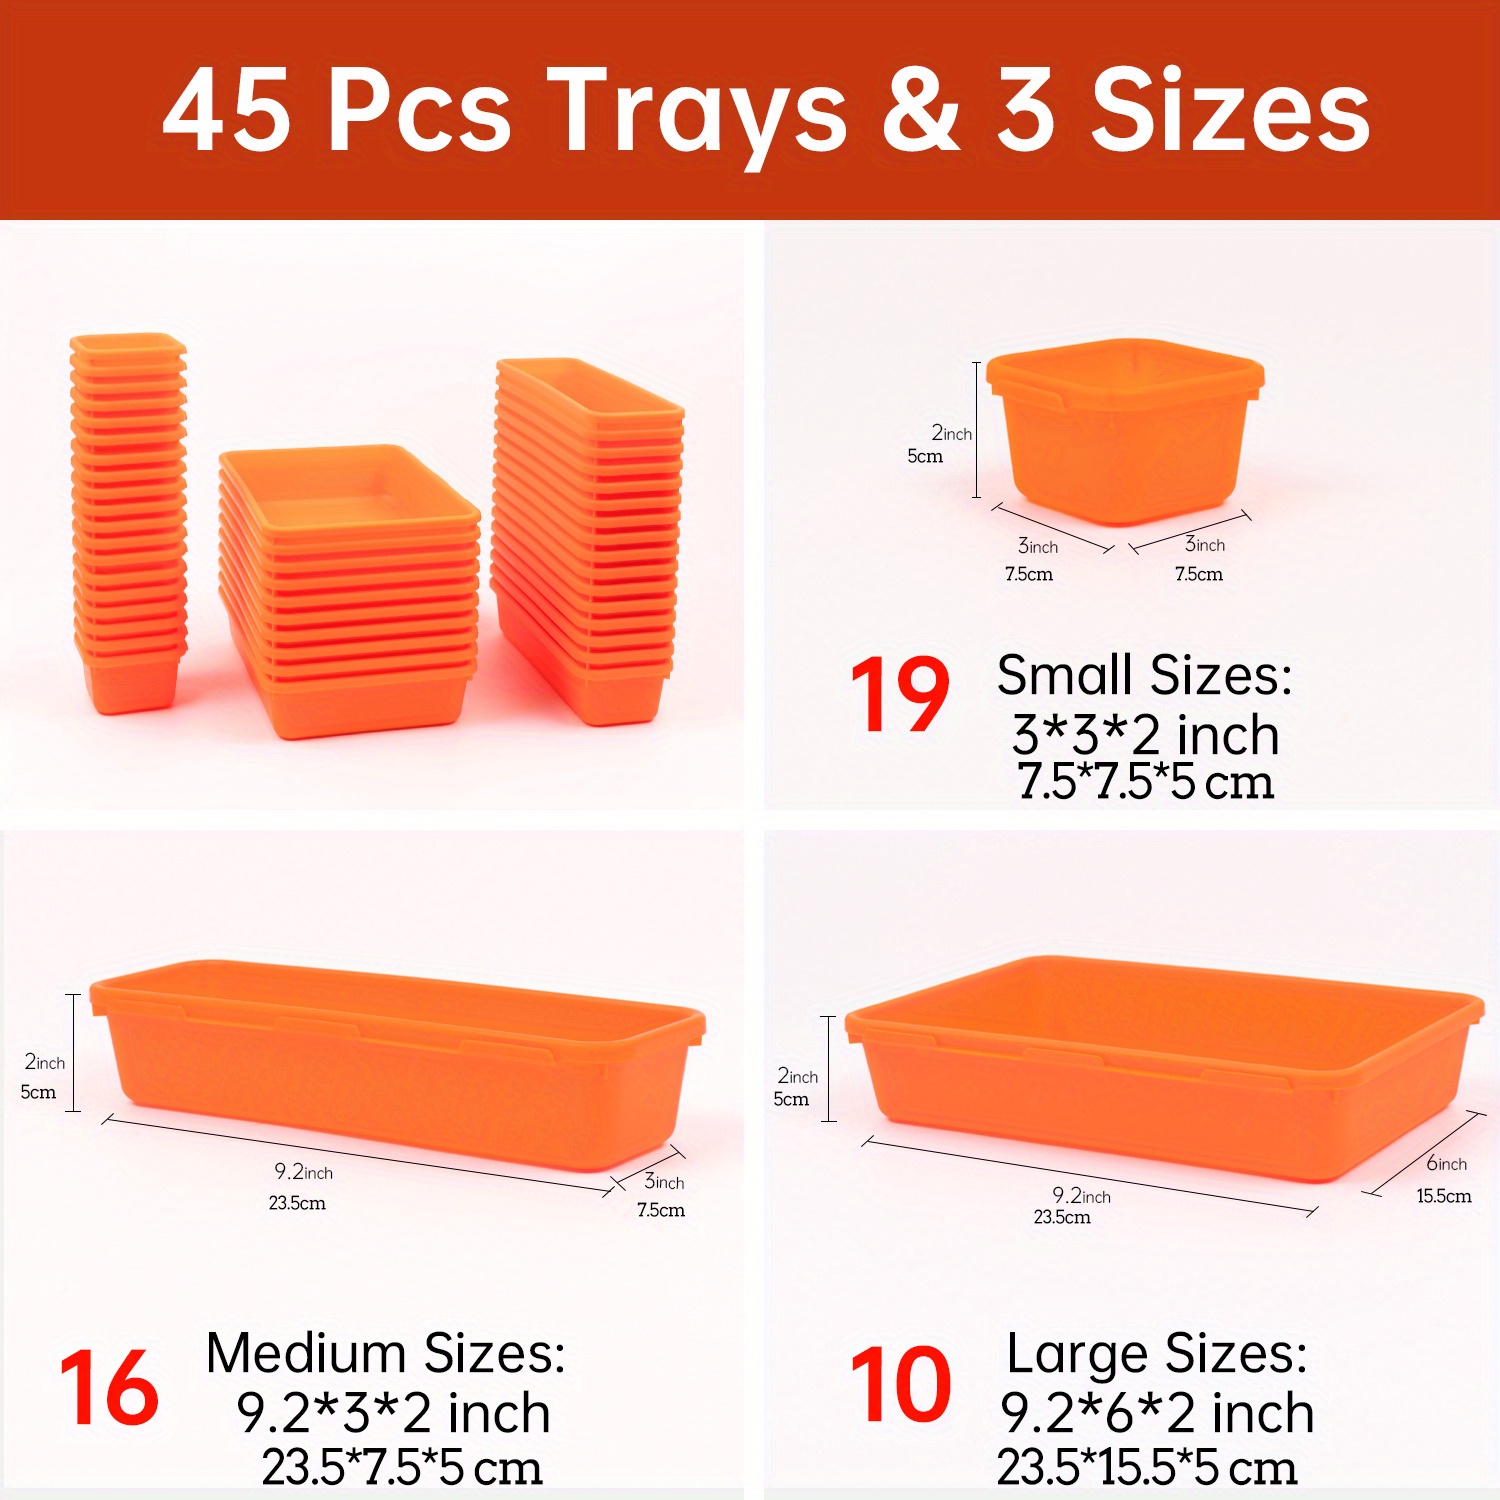 Grey/Orange Plastic Tool Box Organizers, Size: 13 In Ches at Rs 575/piece  in Mumbai